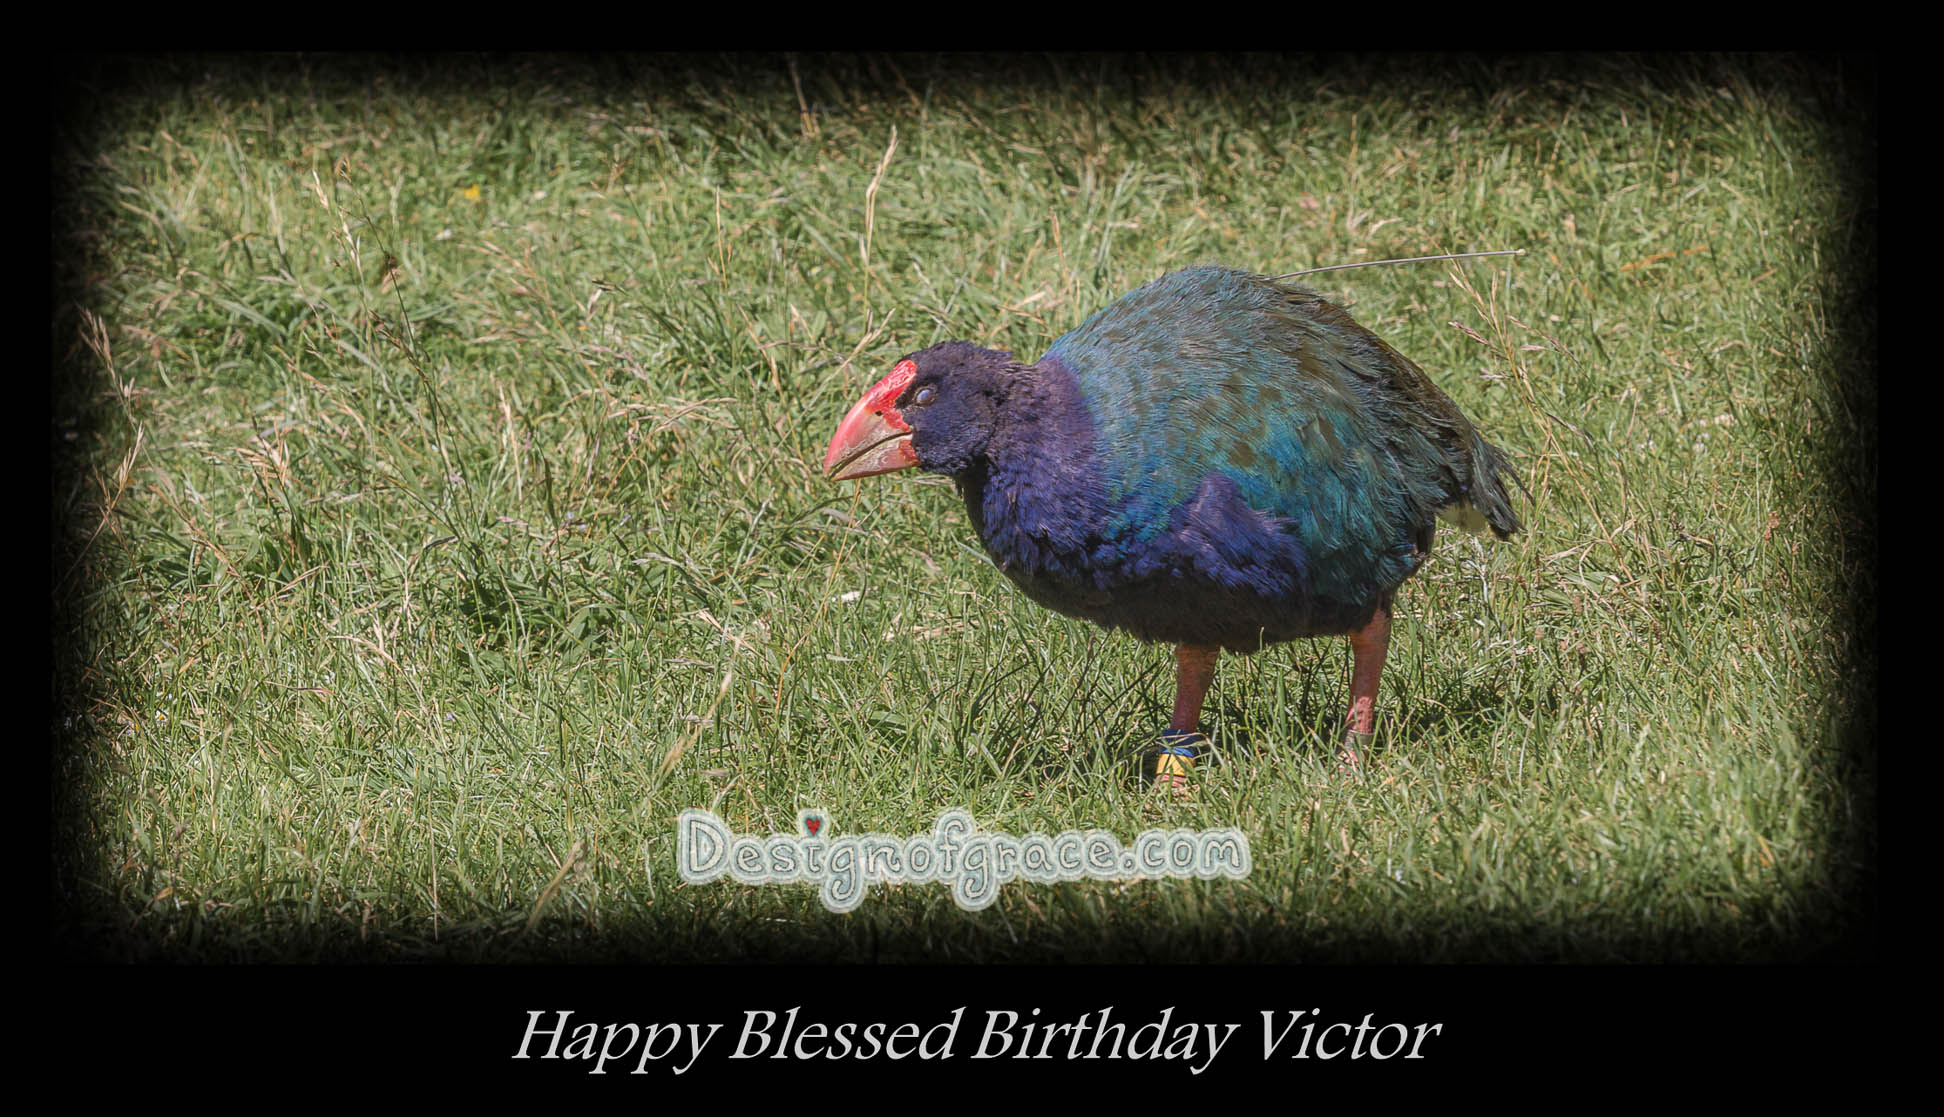 Happy Blessed Birthday Victor with a Takahē bird